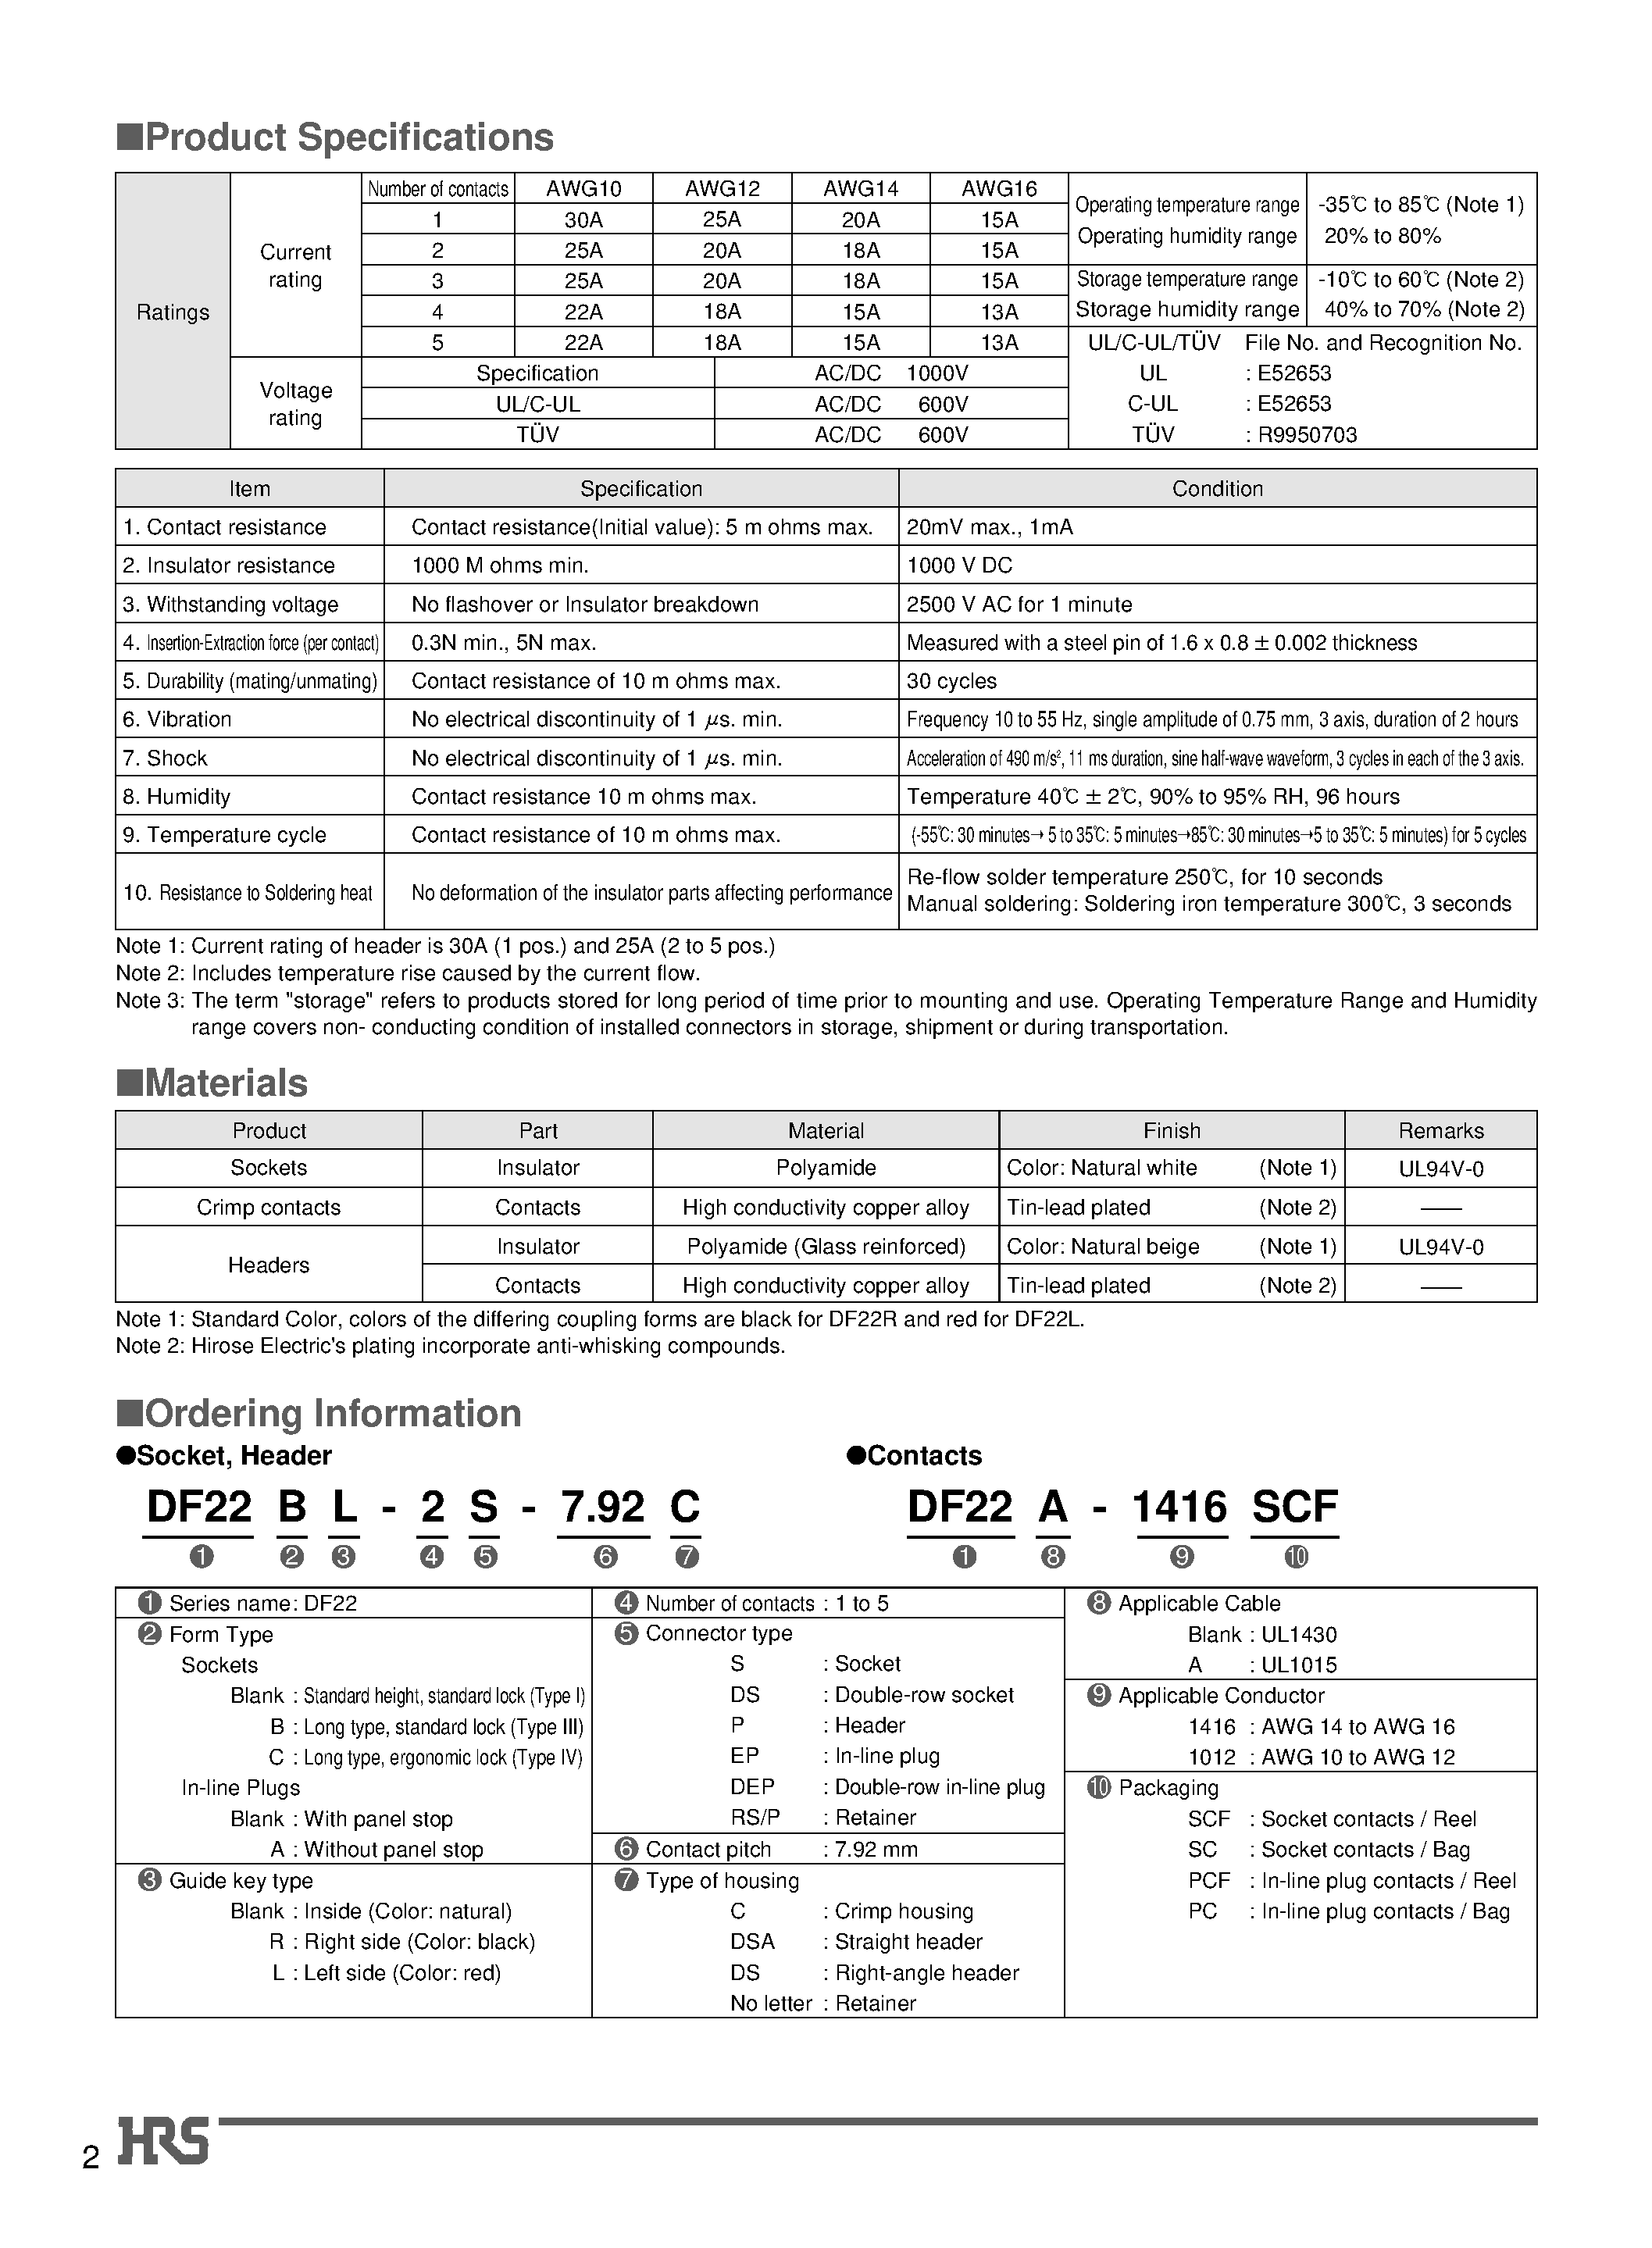 Datasheet DF22-2RS/P-7.92 - 7.92 mm Contact Pitch/ High-Current Connectors for Internal Power Supplies (UL/ C-UL and TUV Listed) page 2